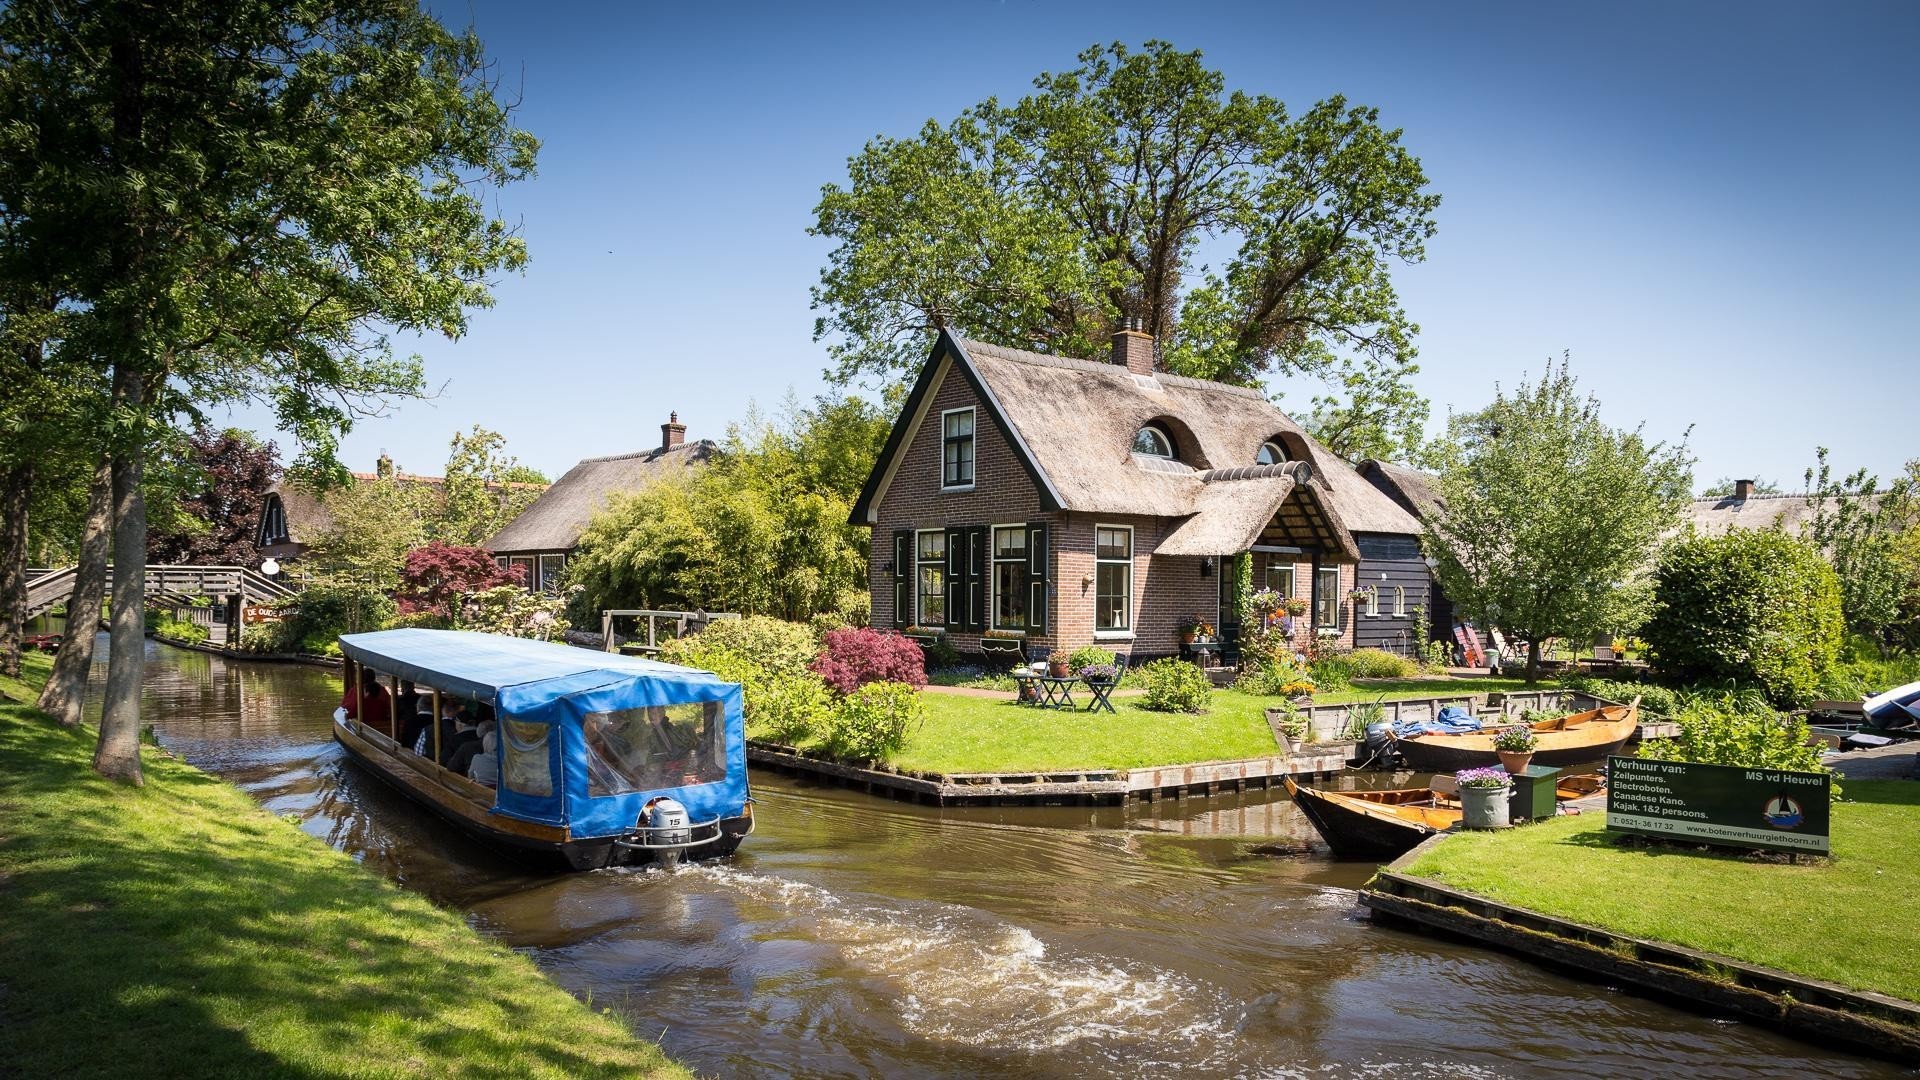 General 1920x1080 architecture house Netherlands water trees garden grass village boat Tourism people flowers canal summer